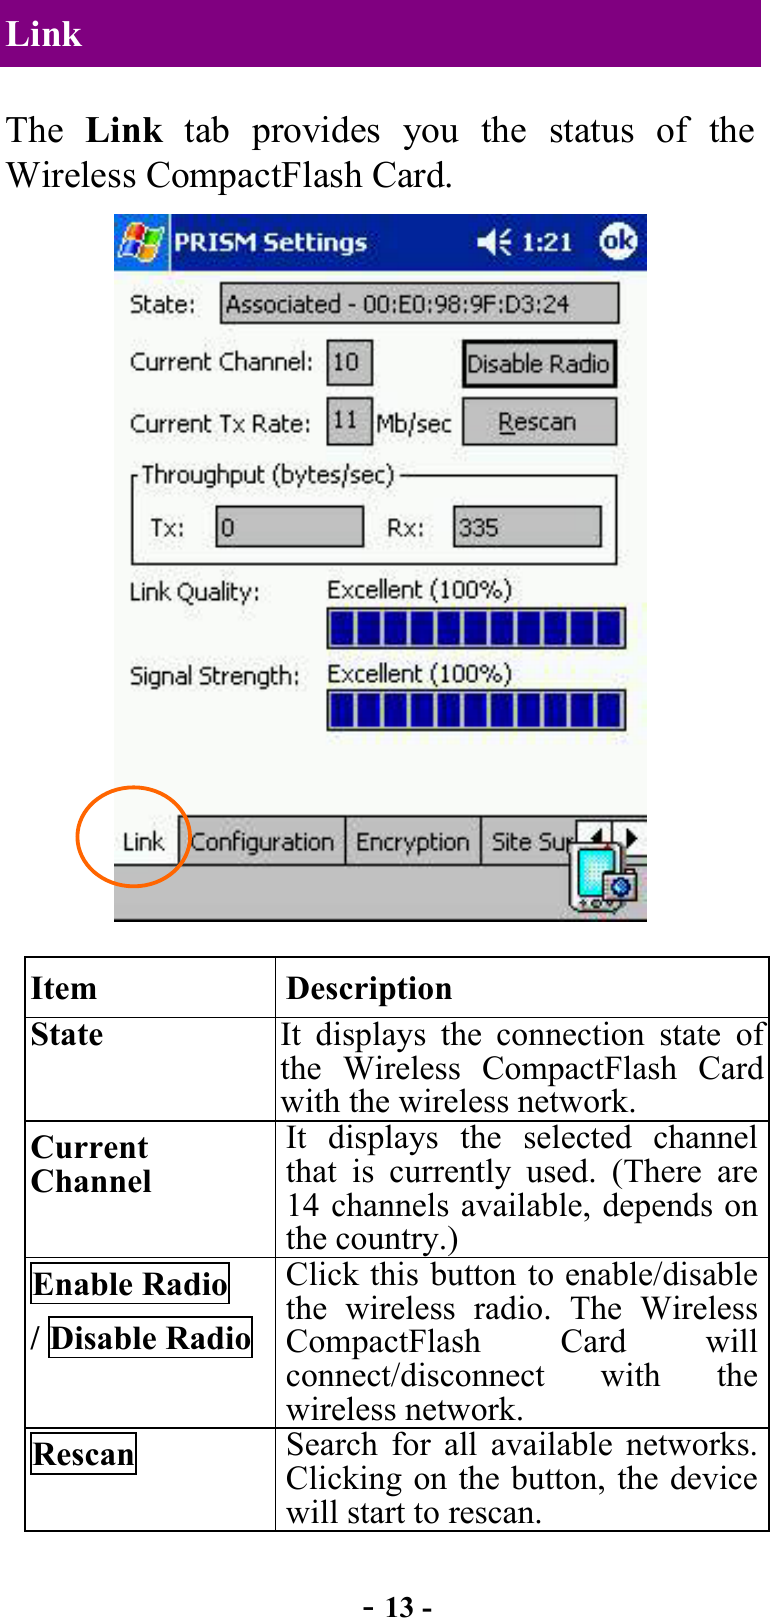  - 13 - Link The  Link tab provides you the status of the Wireless CompactFlash Card.  Item Description State  It displays the connection state of the Wireless CompactFlash Card with the wireless network. Current Channel It displays the selected channel that is currently used. (There are 14 channels available, depends on the country.) Enable Radio / Disable Radio Click this button to enable/disable the wireless radio. The Wireless CompactFlash Card will connect/disconnect with the wireless network. Rescan  Search for all available networks. Clicking on the button, the device will start to rescan. 